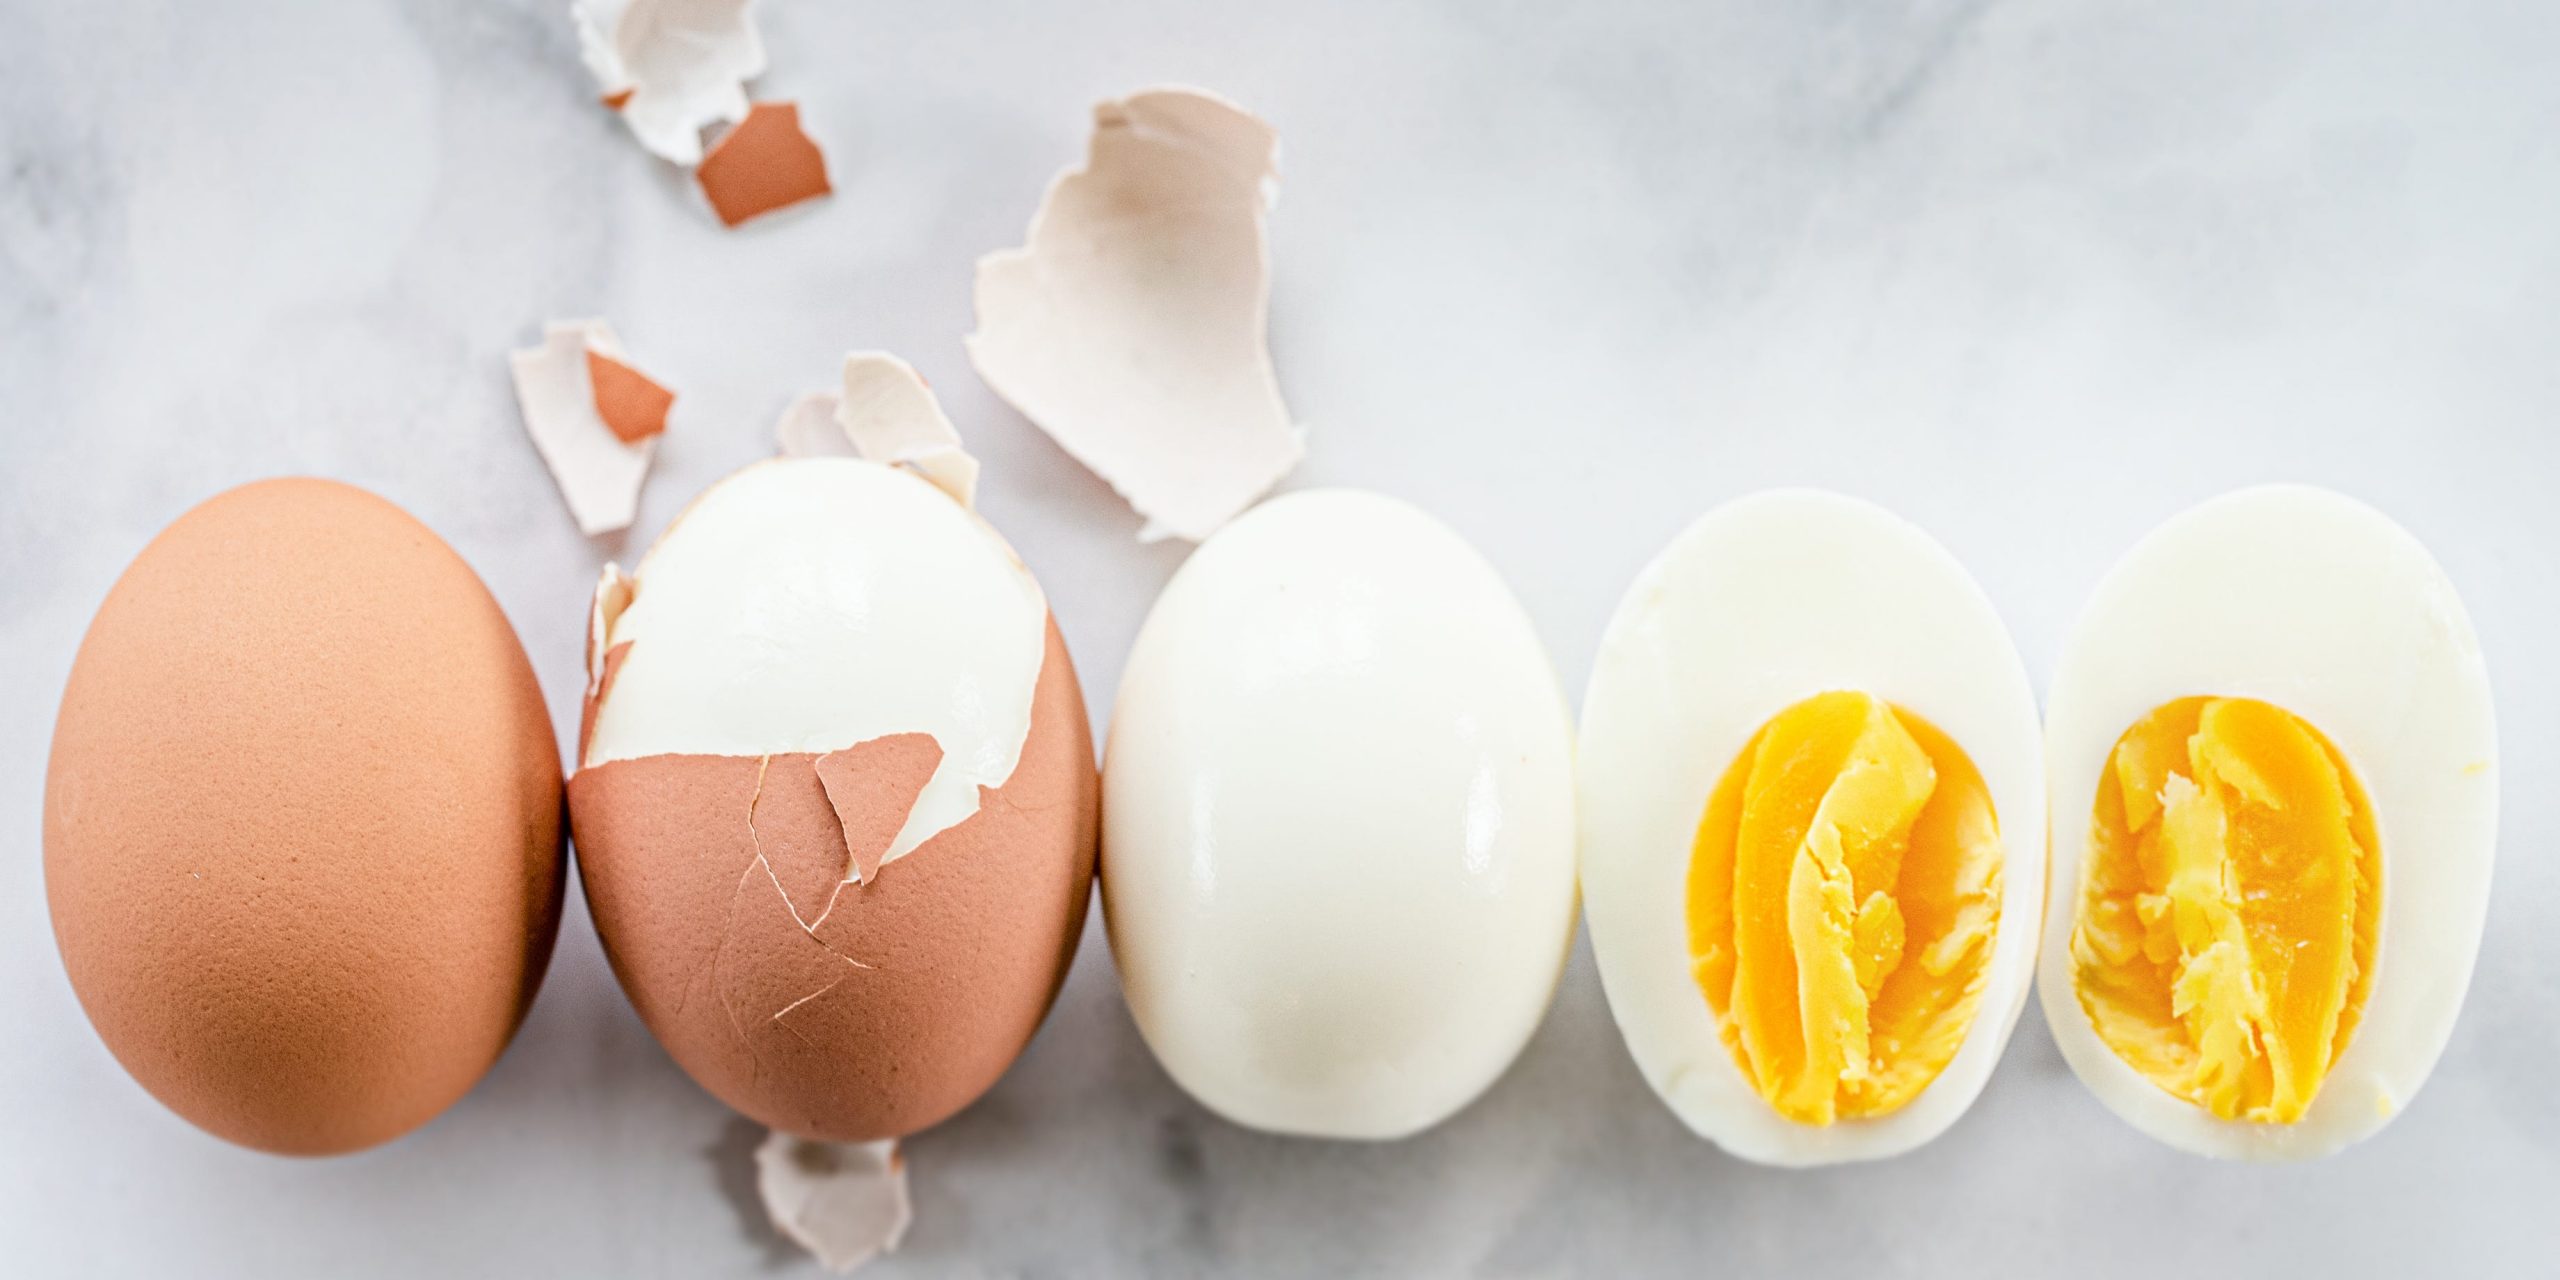 A whole egg in the shell lined up next to a partially peeled hard boiled egg, a fully peeled hard boiled egg, and a sliced open hard boiled egg